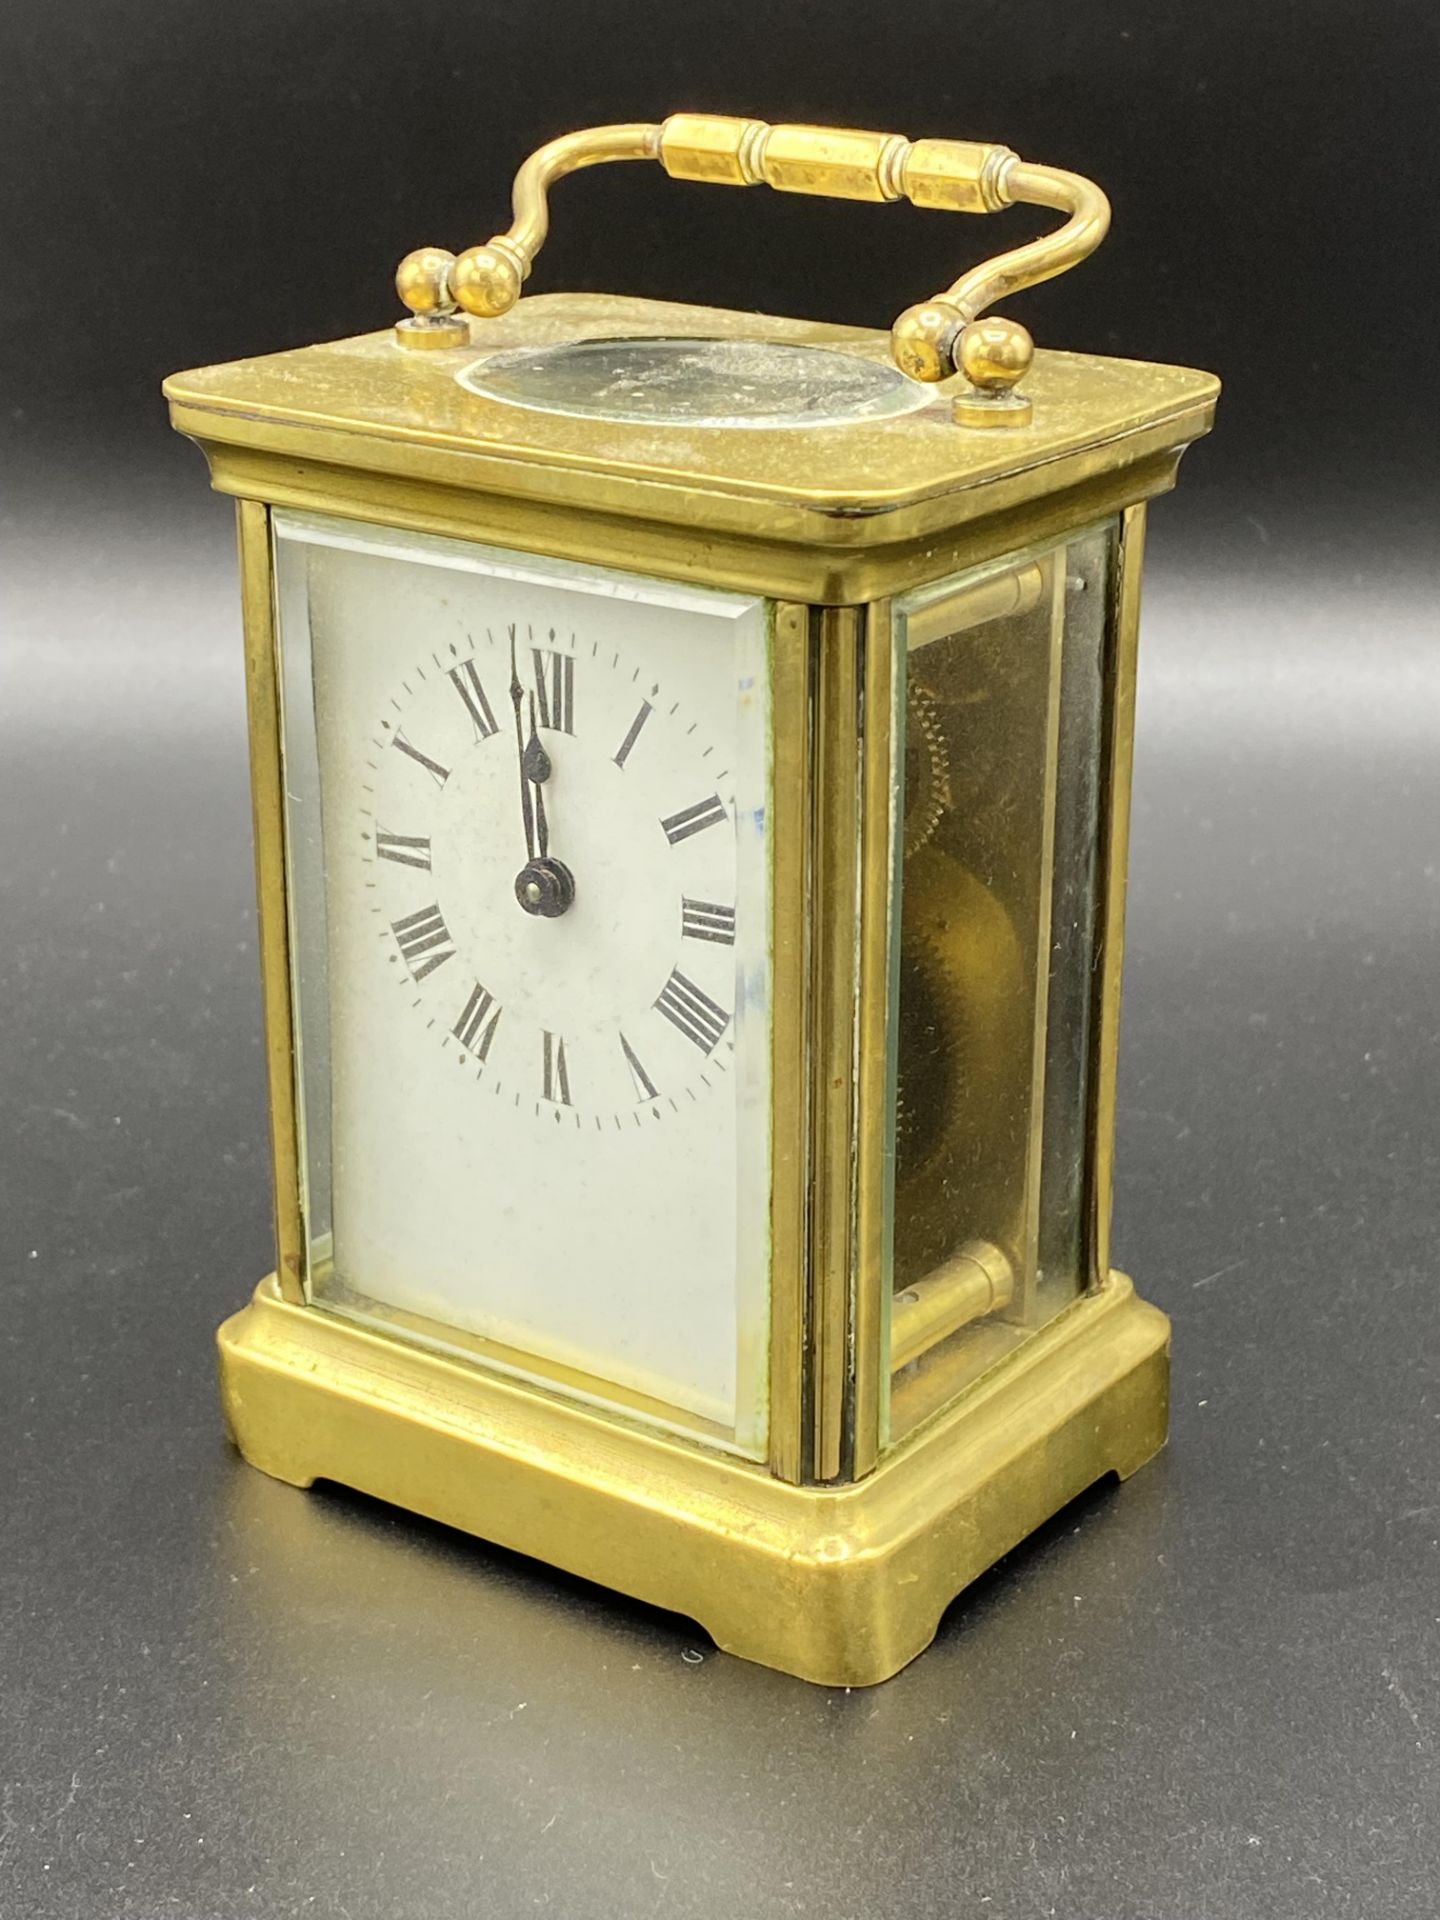 Brass cased carriage clock - Image 2 of 5